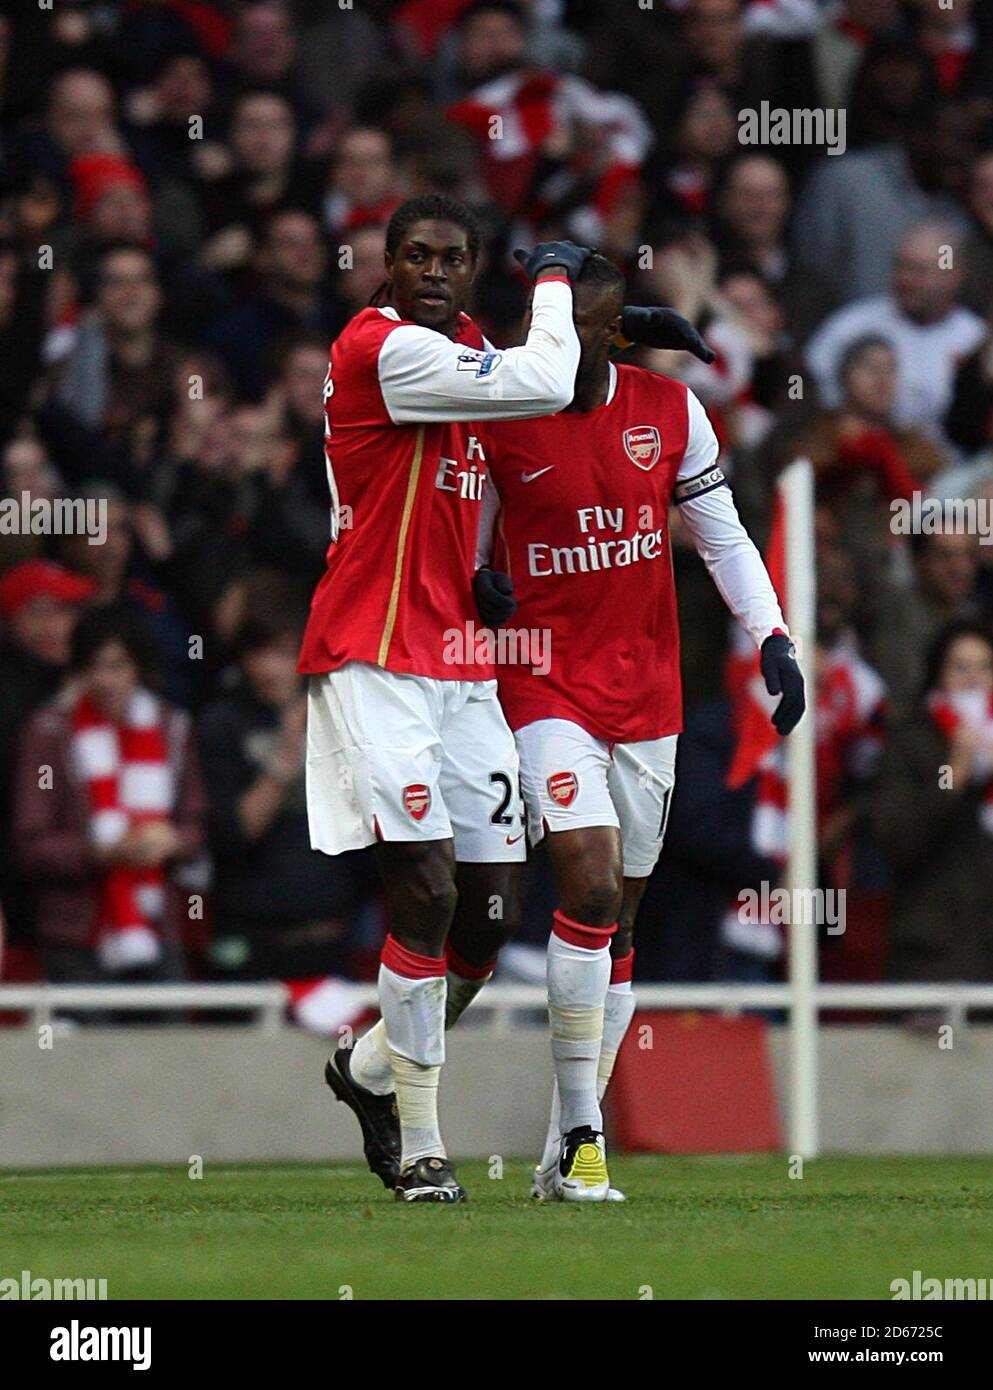 Arsenal's Emmanuel Adebayor (left) celebrates scoring the first goal of the game, with team mate William Gallas. Stock Photo